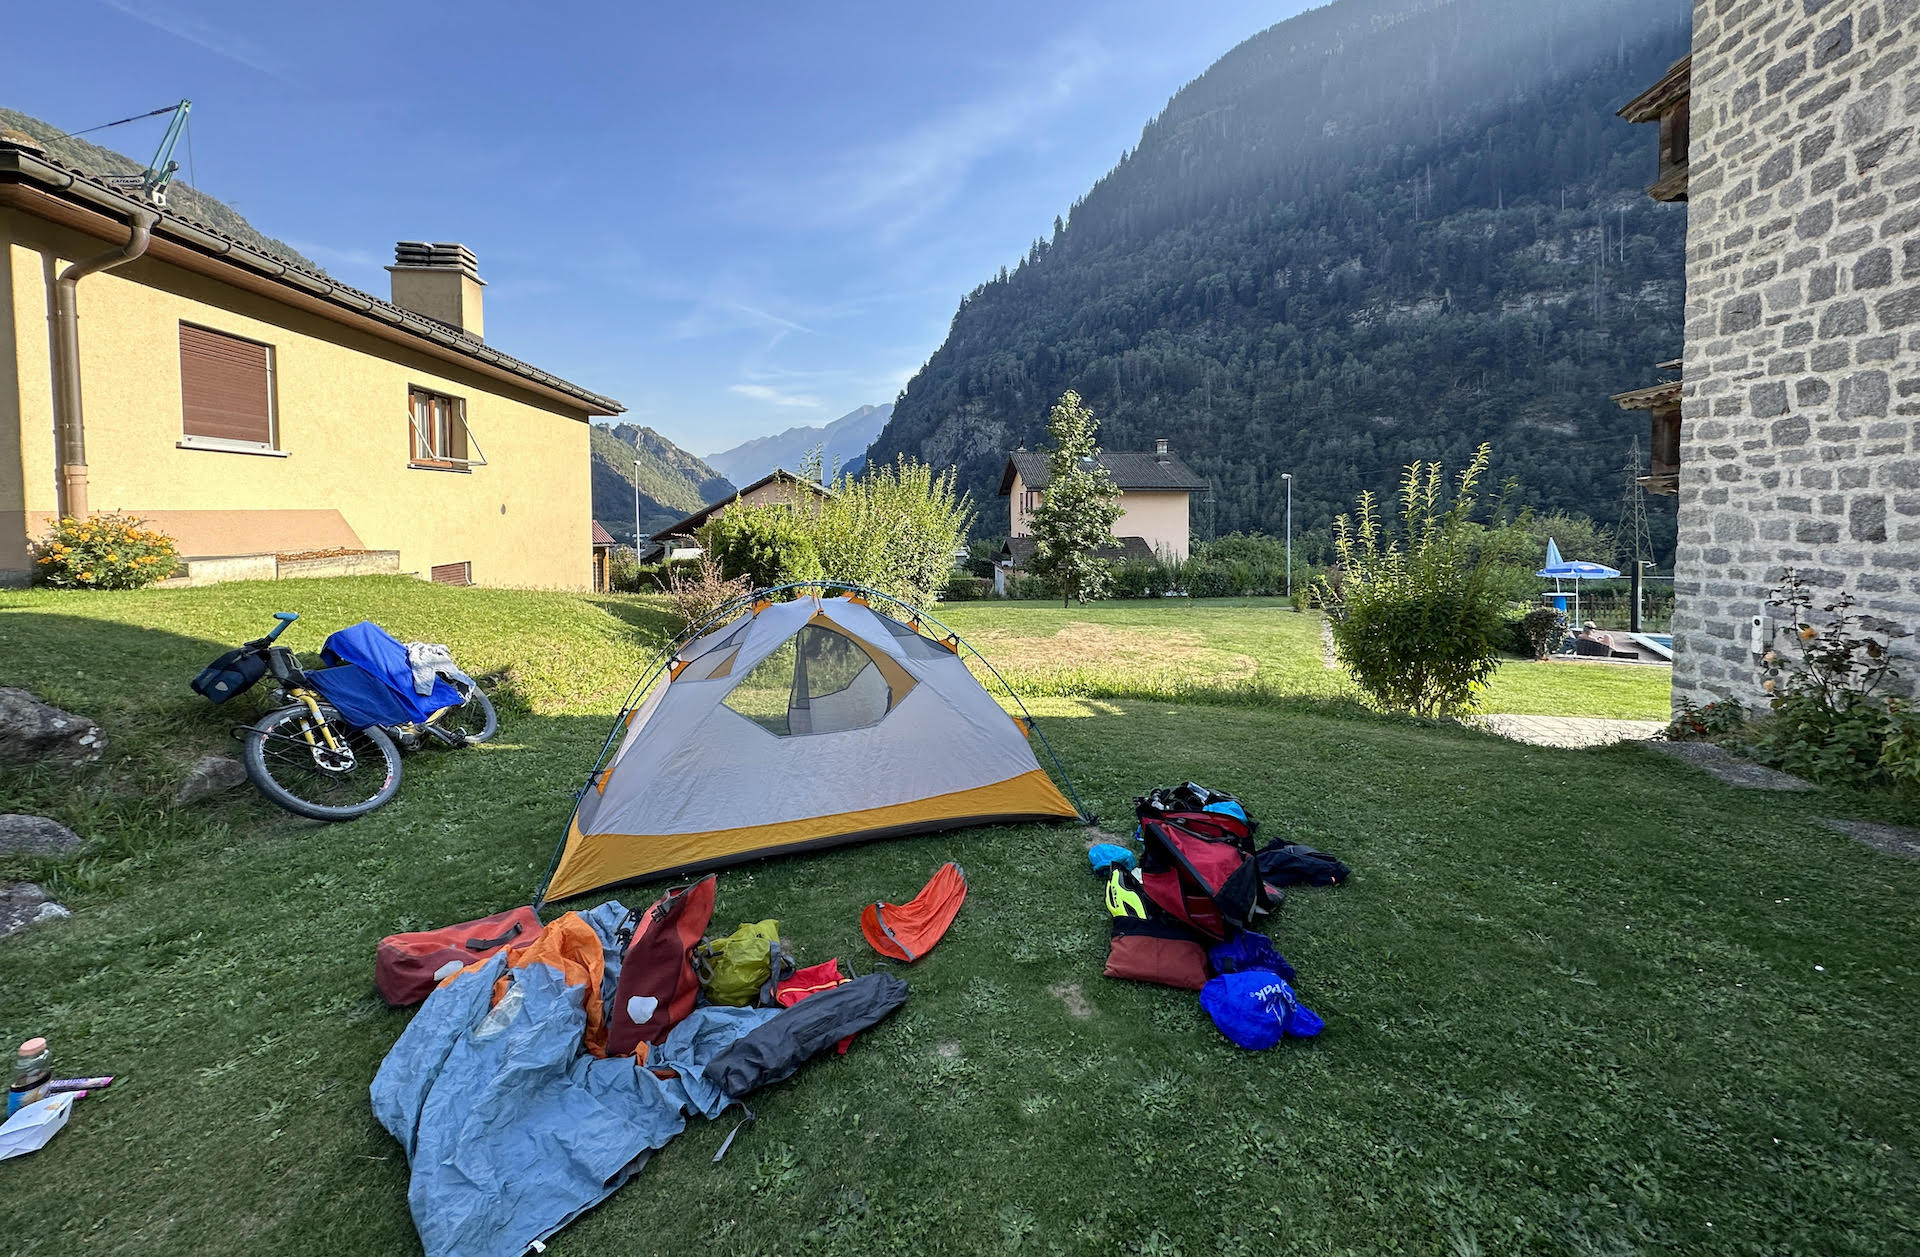 A tent is partly erected on some grass with Jim's bike and other gear strewn around it. There's a mountain in the background.